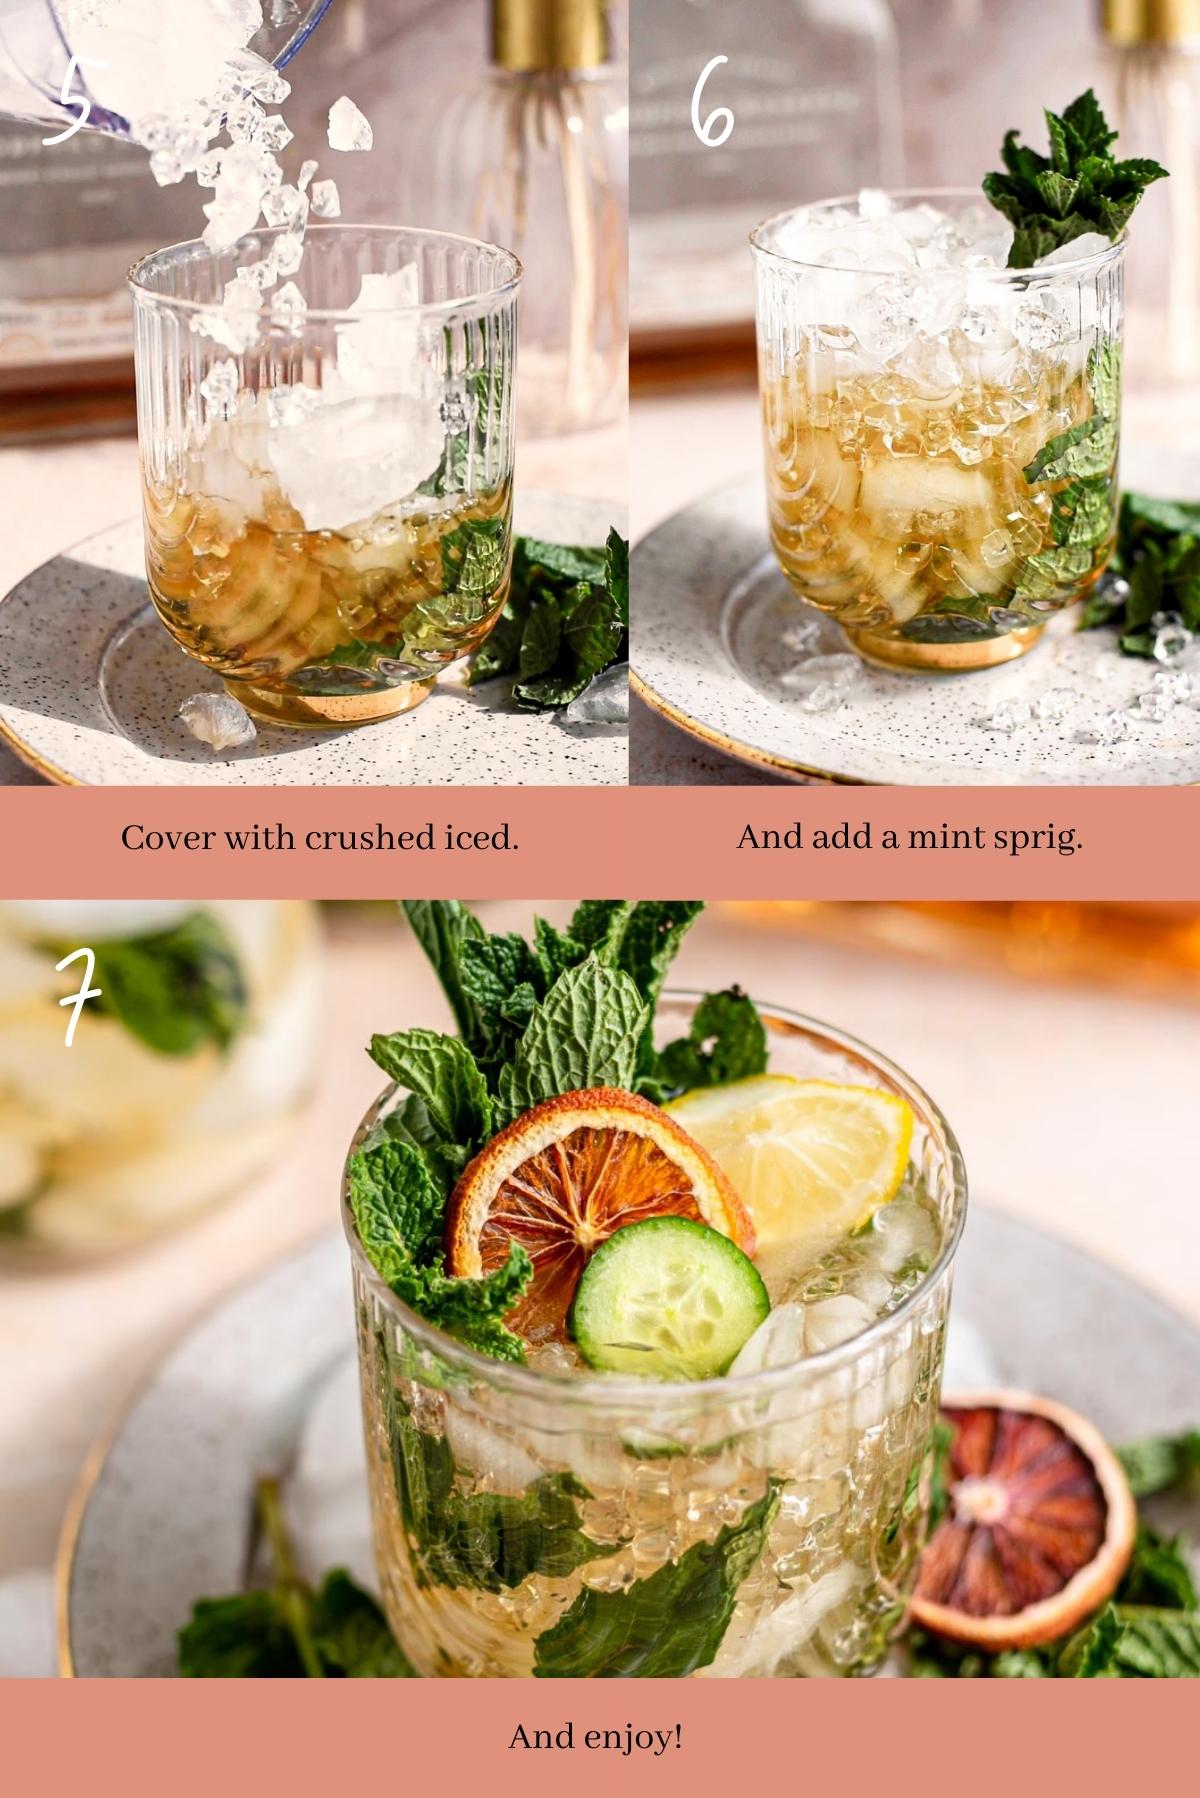 Collage showing how to make a mint julep.